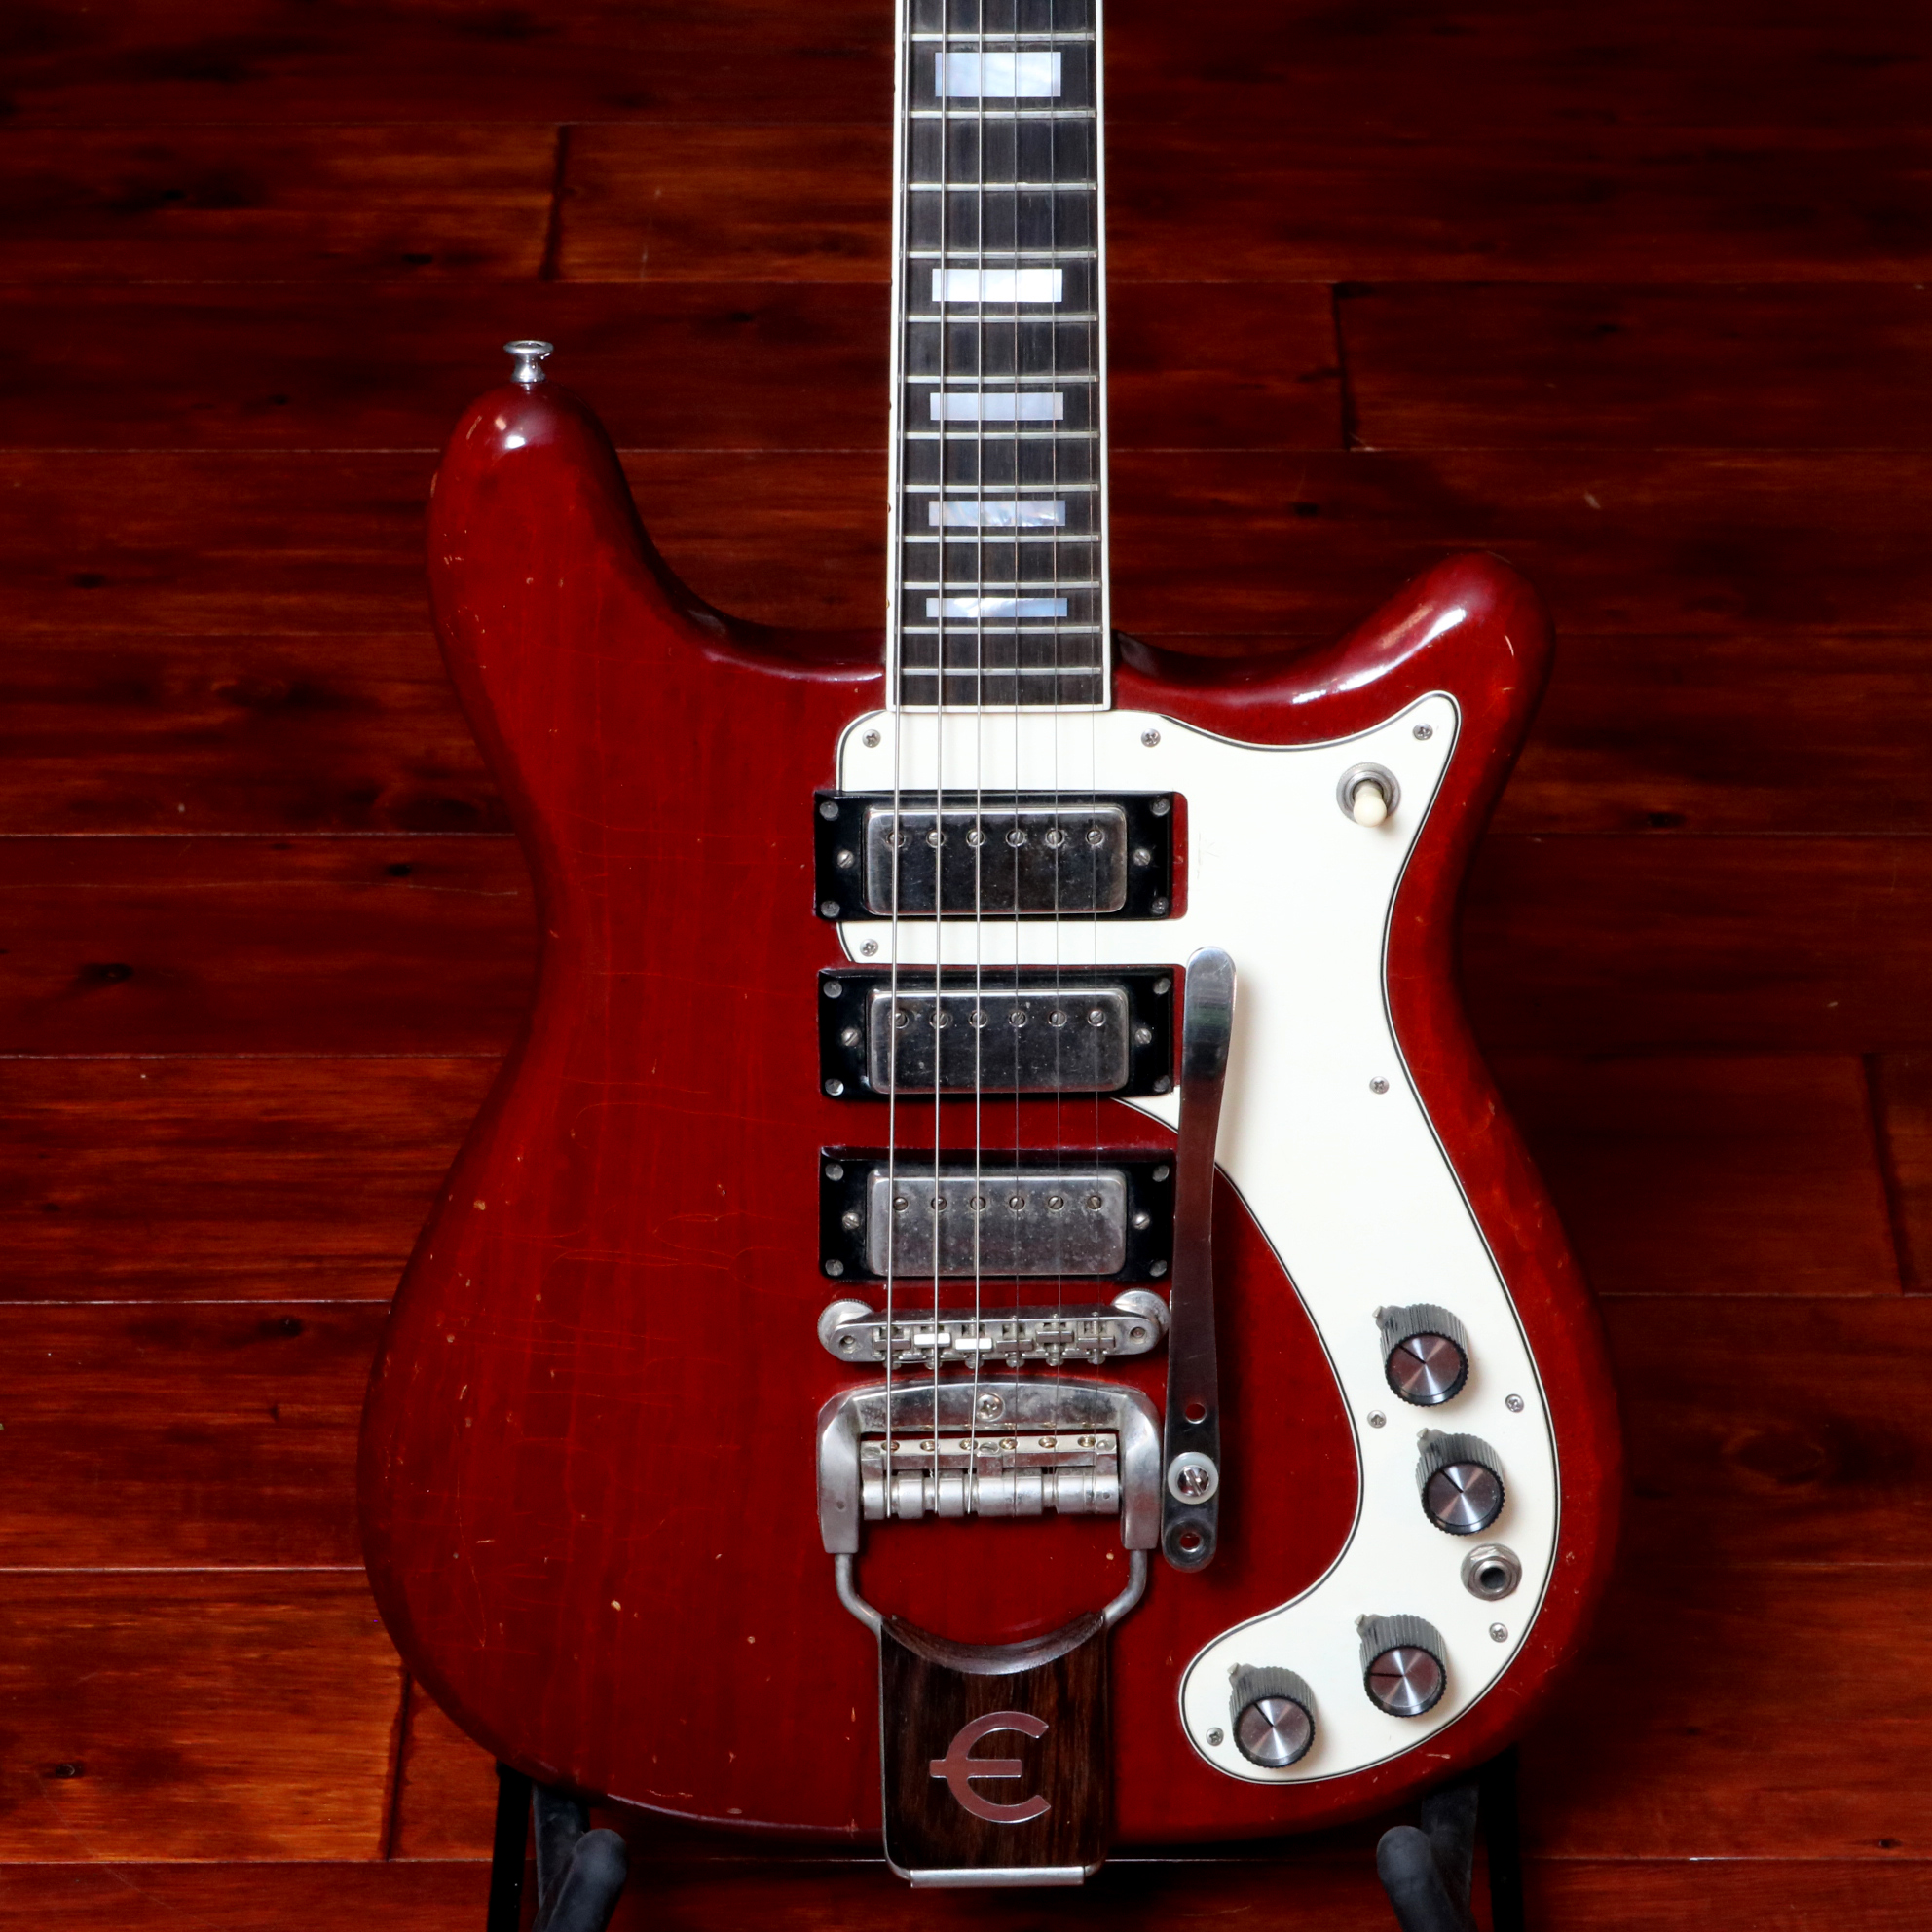 Epiphone Crestwood Deluxe 1965 Cherry Red Guitar For Sale Garys Classic